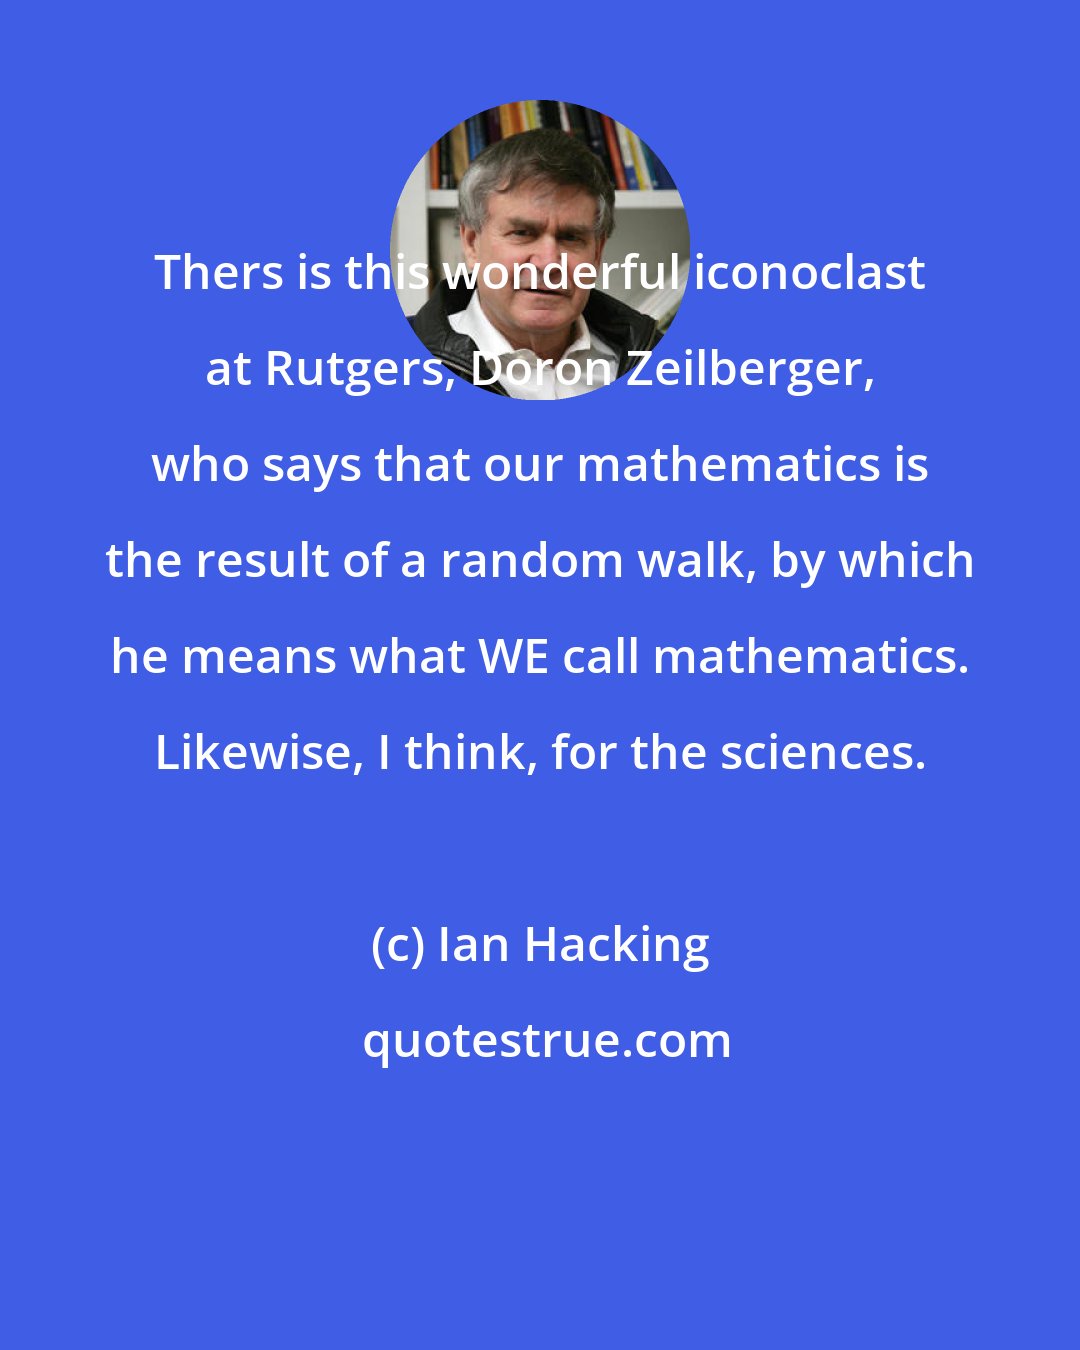 Ian Hacking: Thers is this wonderful iconoclast at Rutgers, Doron Zeilberger, who says that our mathematics is the result of a random walk, by which he means what WE call mathematics. Likewise, I think, for the sciences.